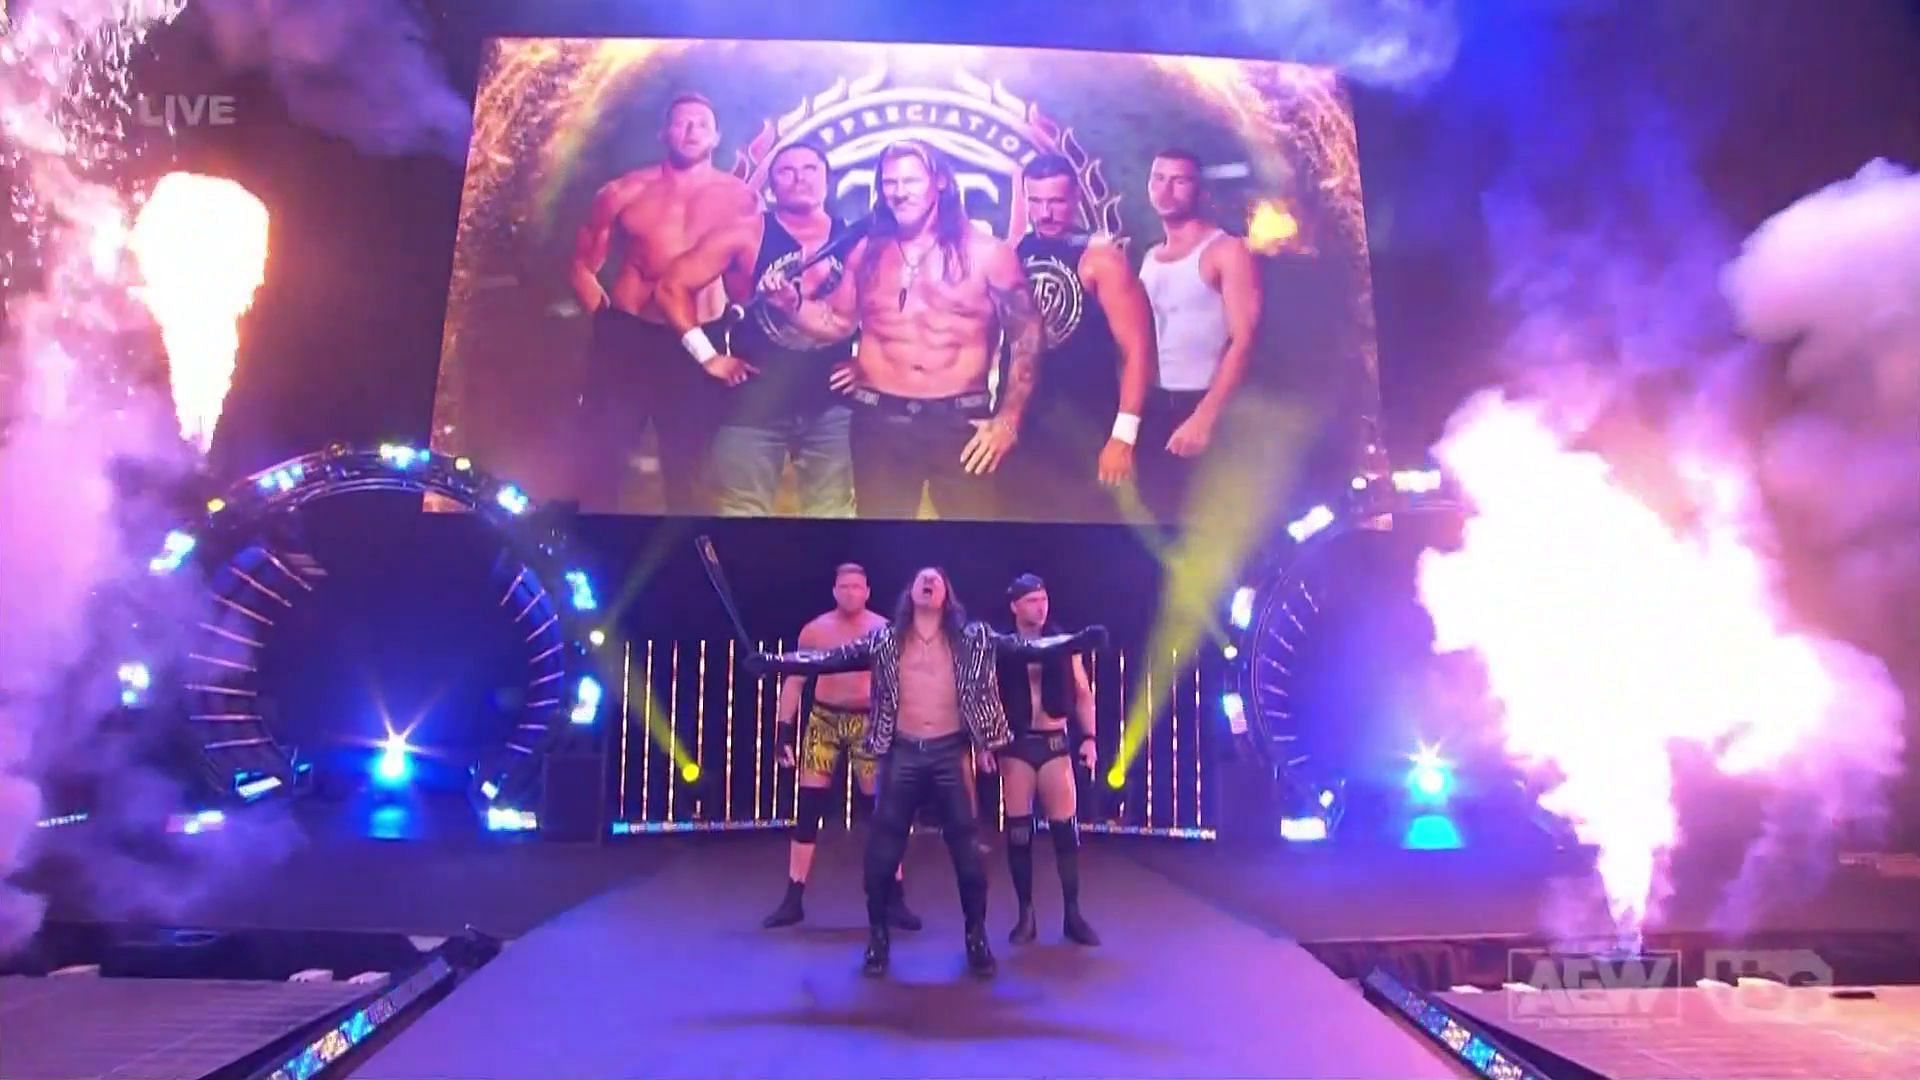 The Jericho Appreciation Society made its way to the ring on AEW Dynamite.